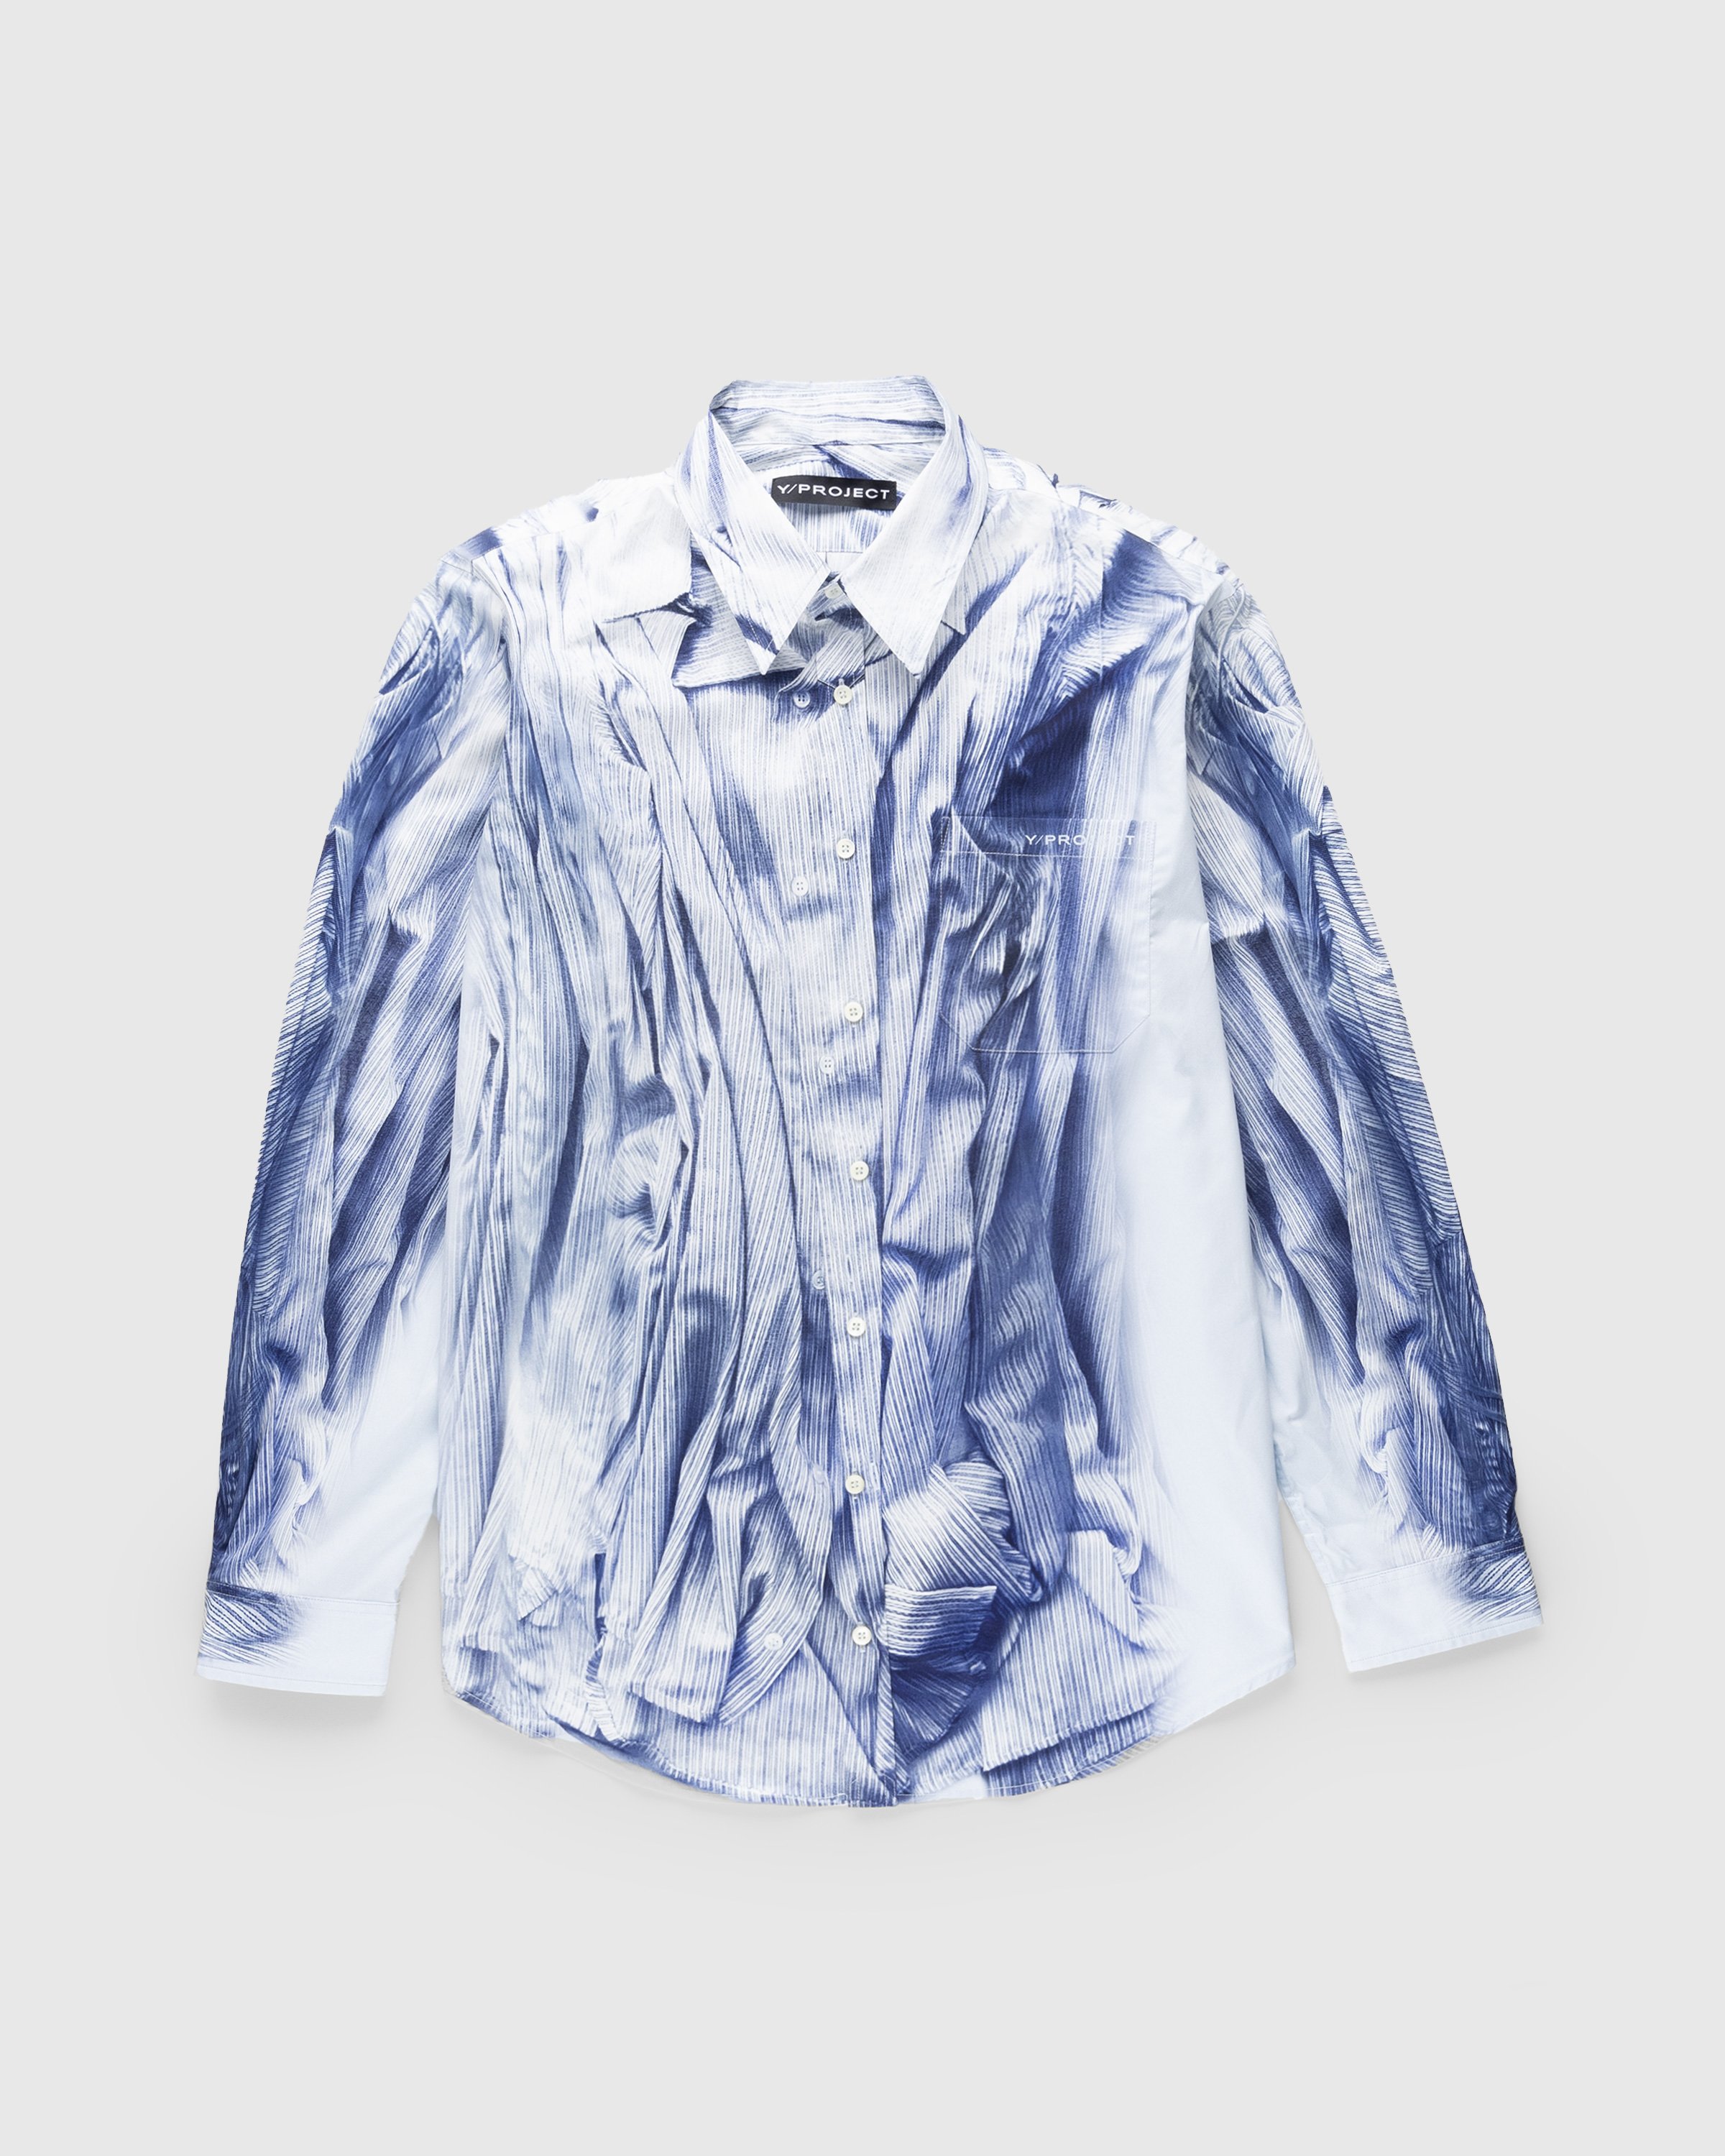 Y/Project - COMPACT PRINT SHIRT - Clothing - Blue - Image 1